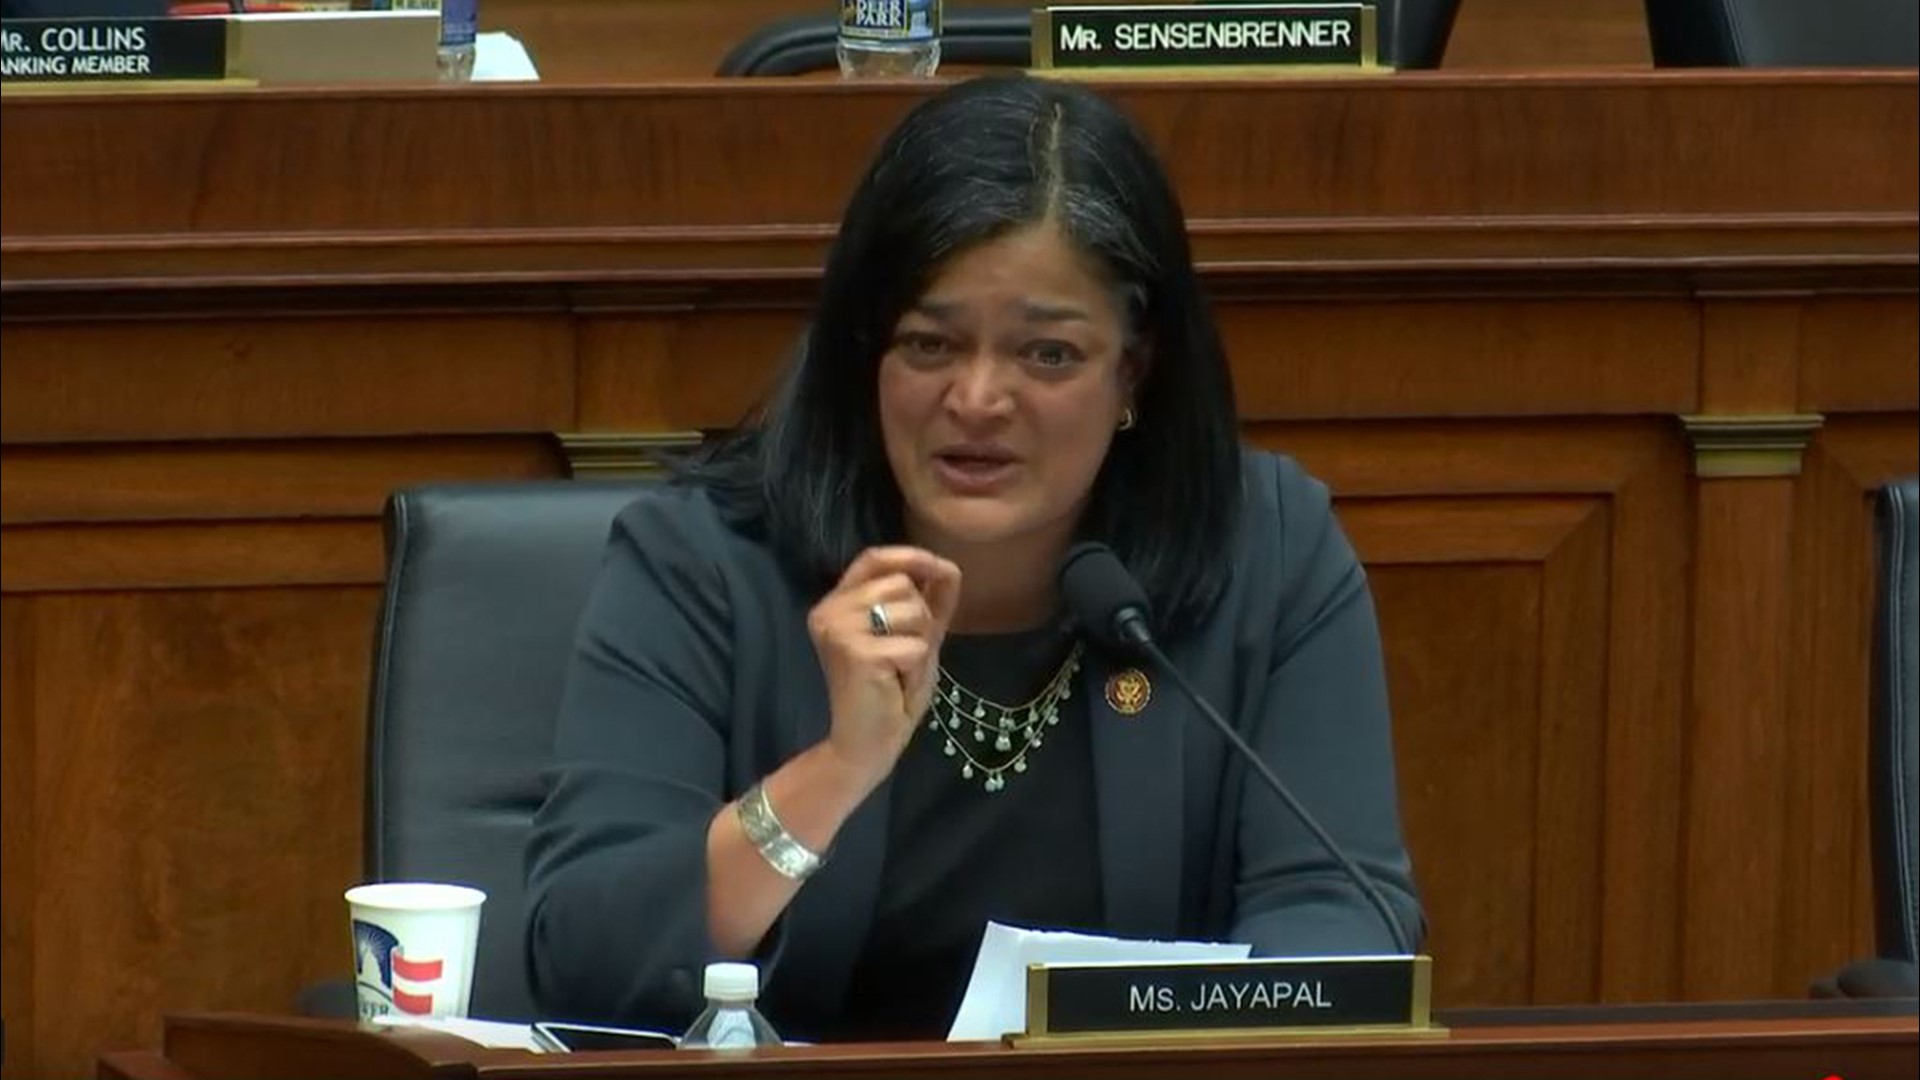 Jayapal said she was locked down during last week's siege with lawmakers who refused to wear masks.